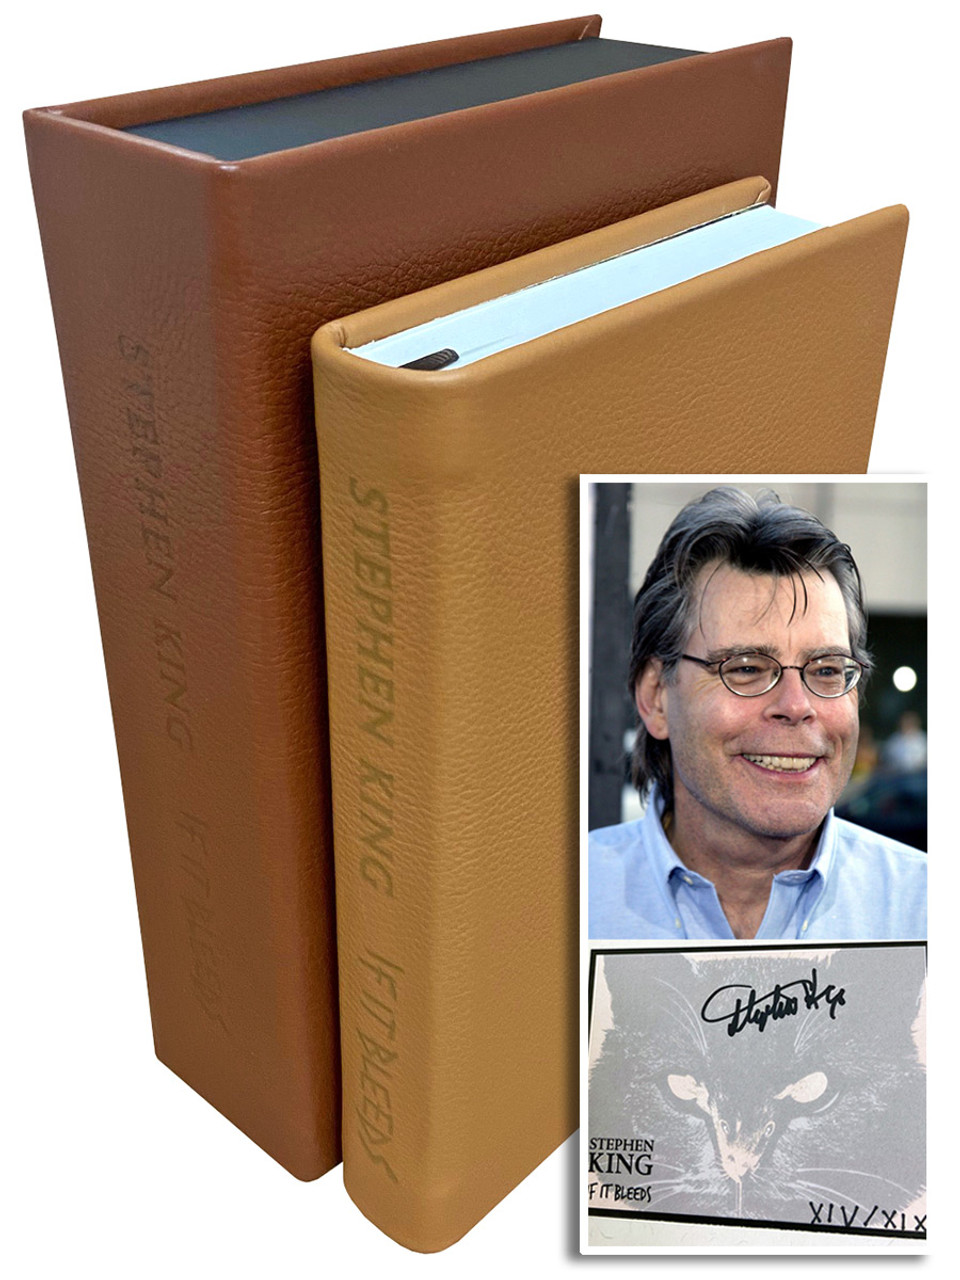 Stephen King "If It Bleeds" Signed Roman Numeral Edition XIV/XIX , Leather Bound Collector's Edition Tray-cased  [Very Fine]